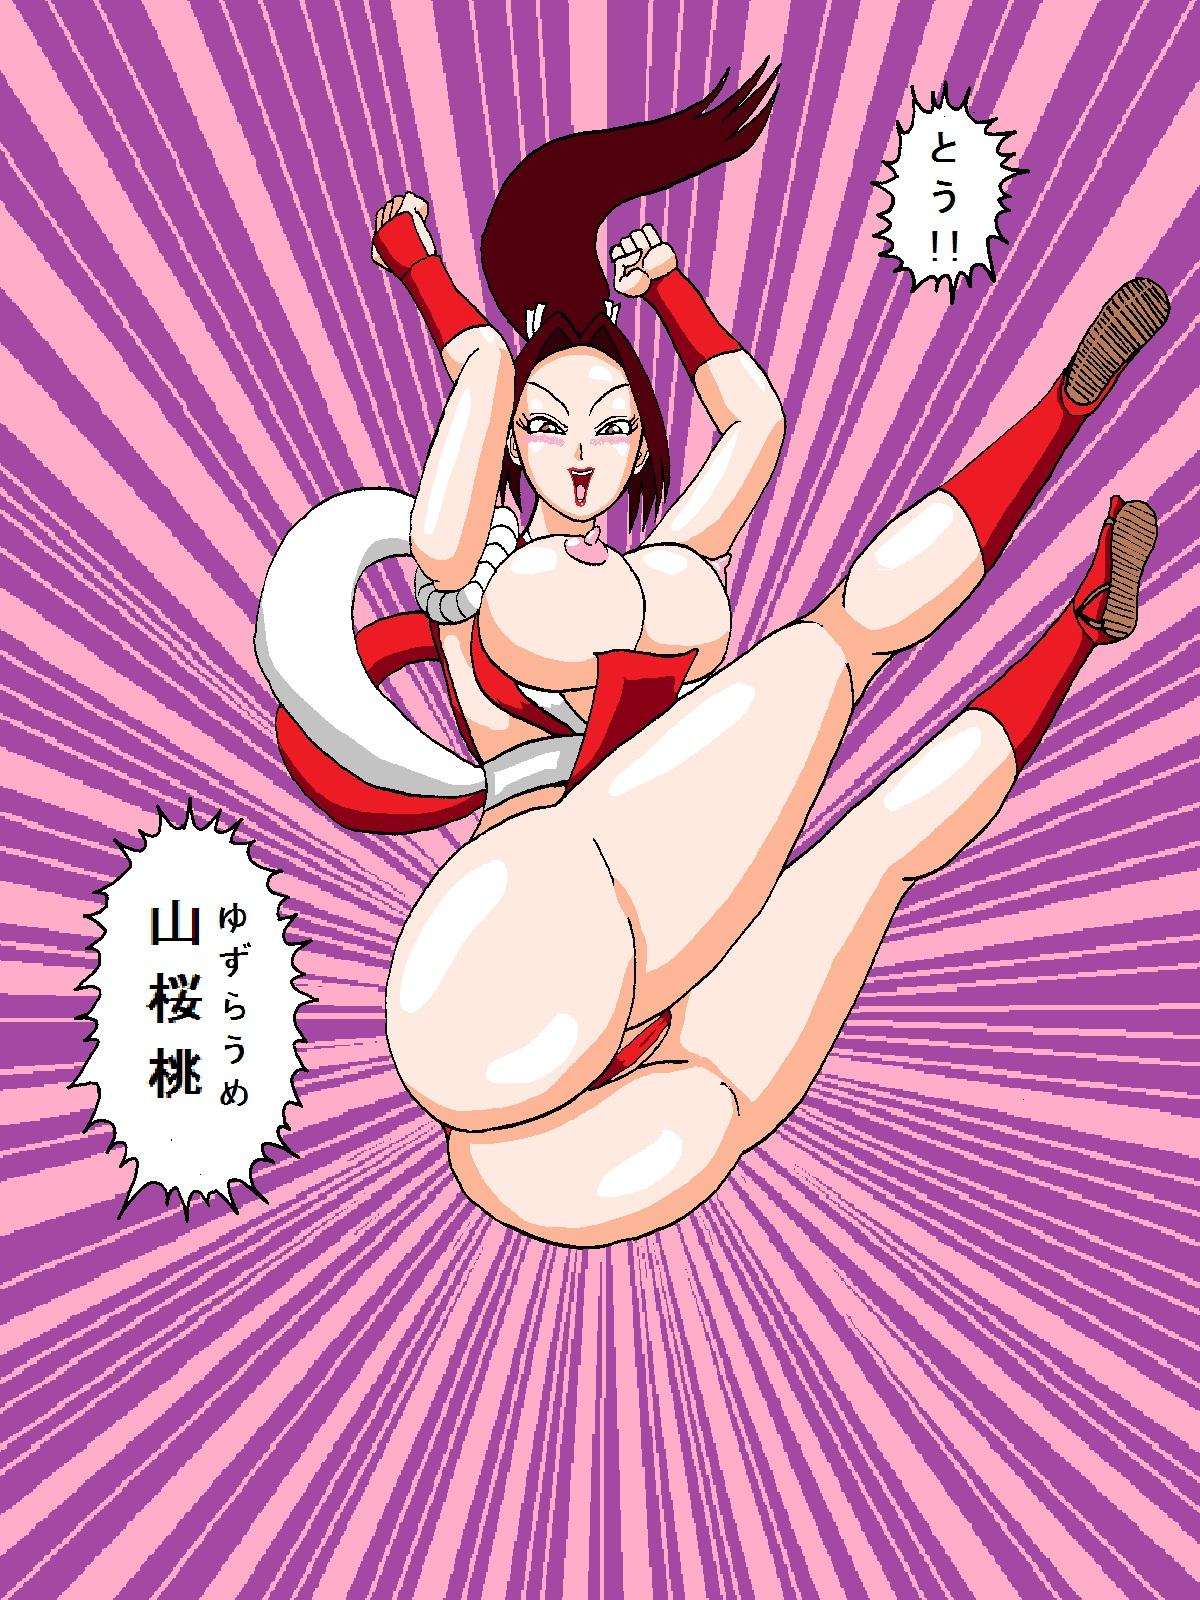 Smalltits [舞狩] Mai-chan vs Chris-kun (King of Fighters) - King of fighters Role Play - Page 10